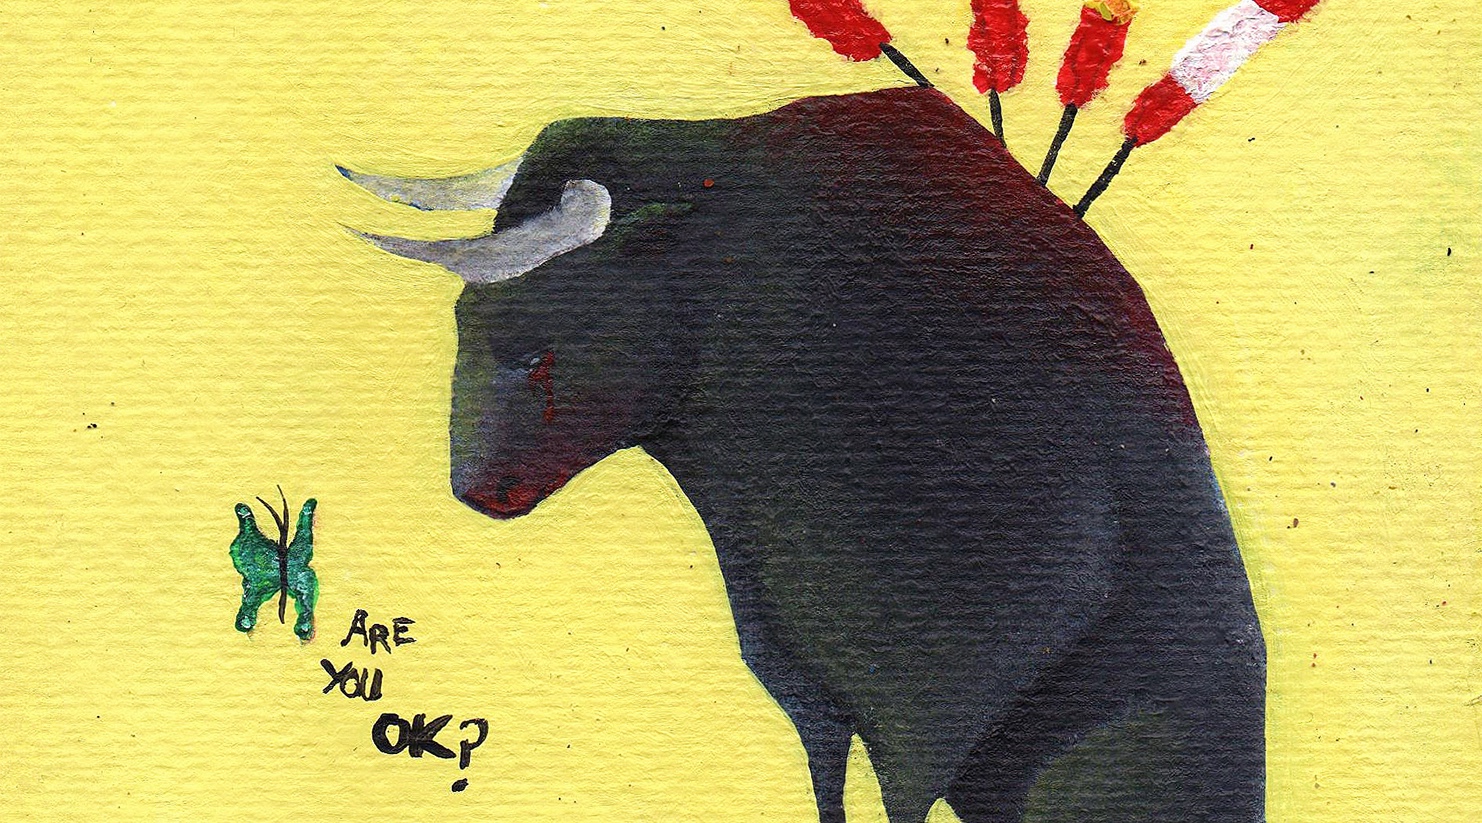 Detail from an illustration of a dark gray bull bleeding on its face with red muletas stuck in its back looking at a green butterfly who is asking: Are you OK? with a bright yellow background. Are you OK? by Belén González (Matitafore) is licensed under CC BY-NC-SA 4.0.